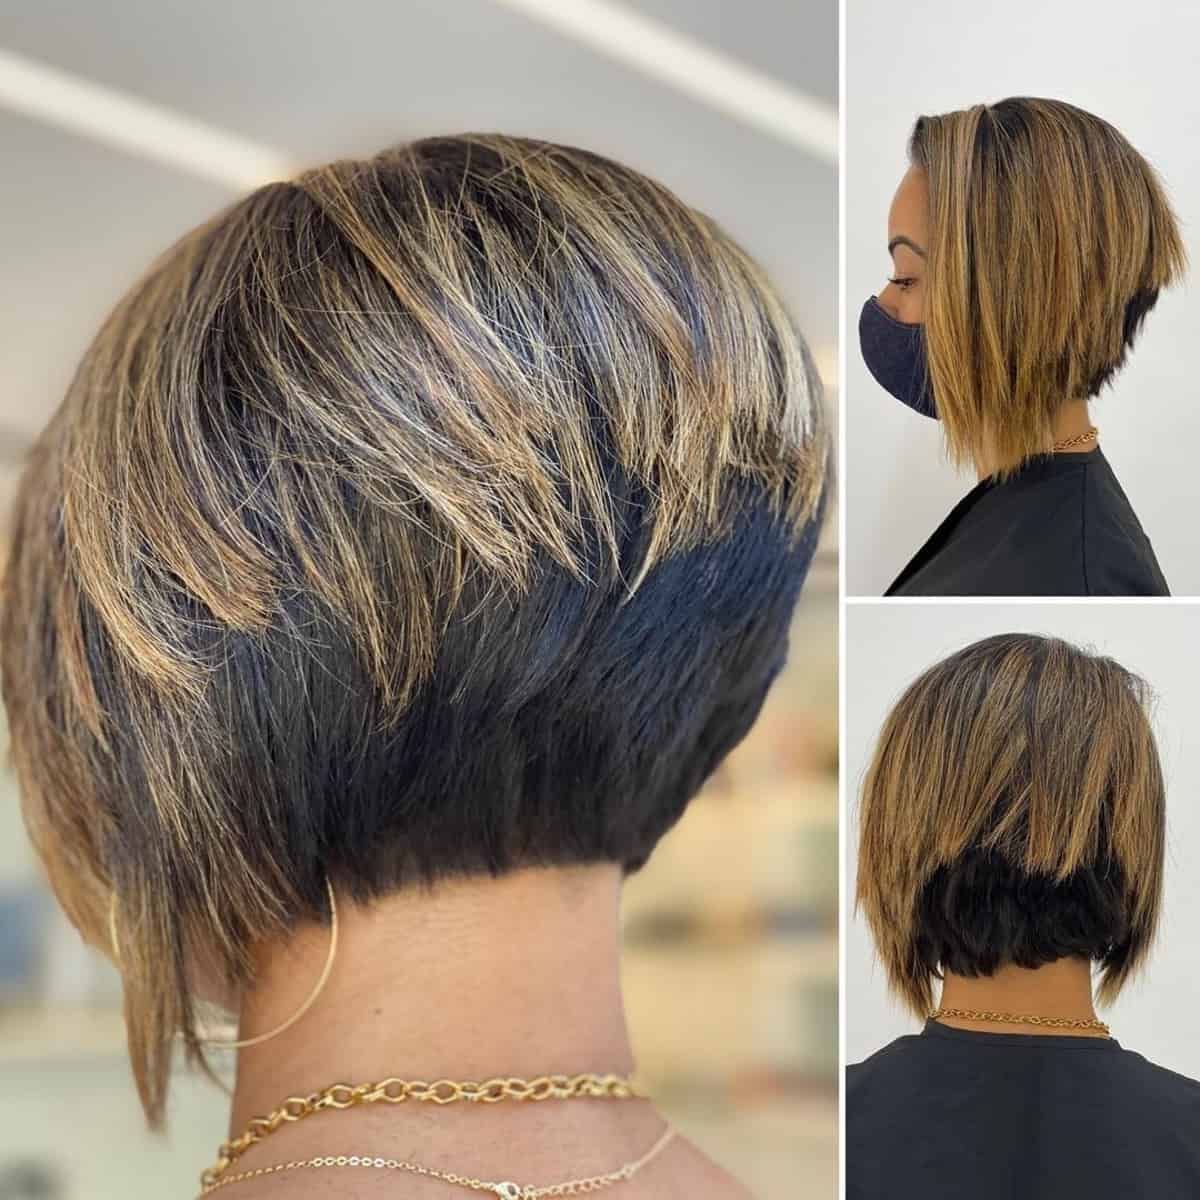 Top 16 Short Inverted Bob Haircuts Trending In 2022 With Angled Bob Short Hair Hairstyles (View 3 of 25)